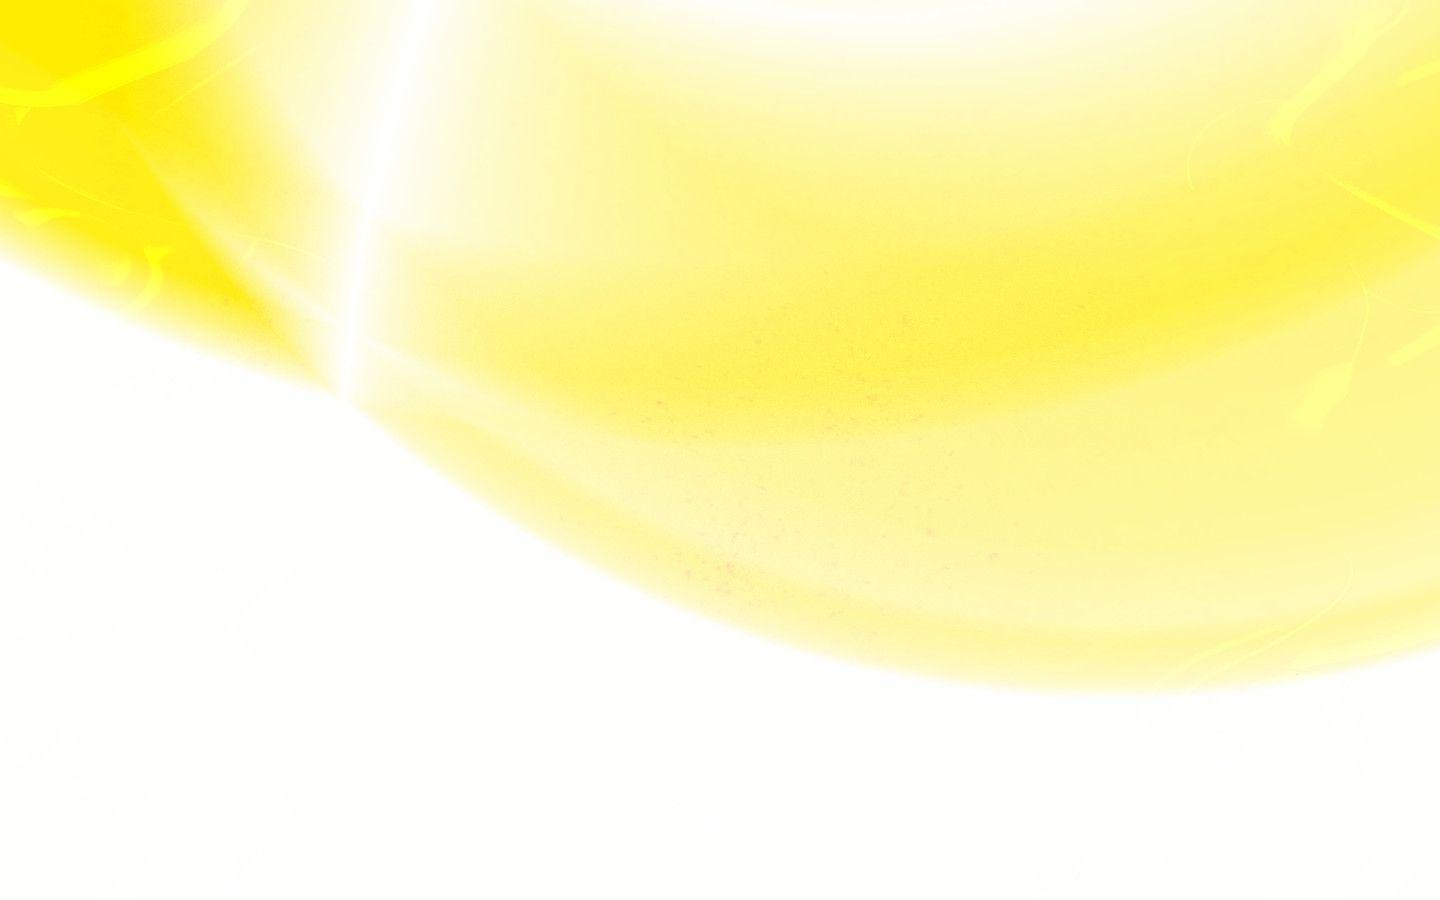 Light yellow abstract Free PPT Background for your PowerPoint